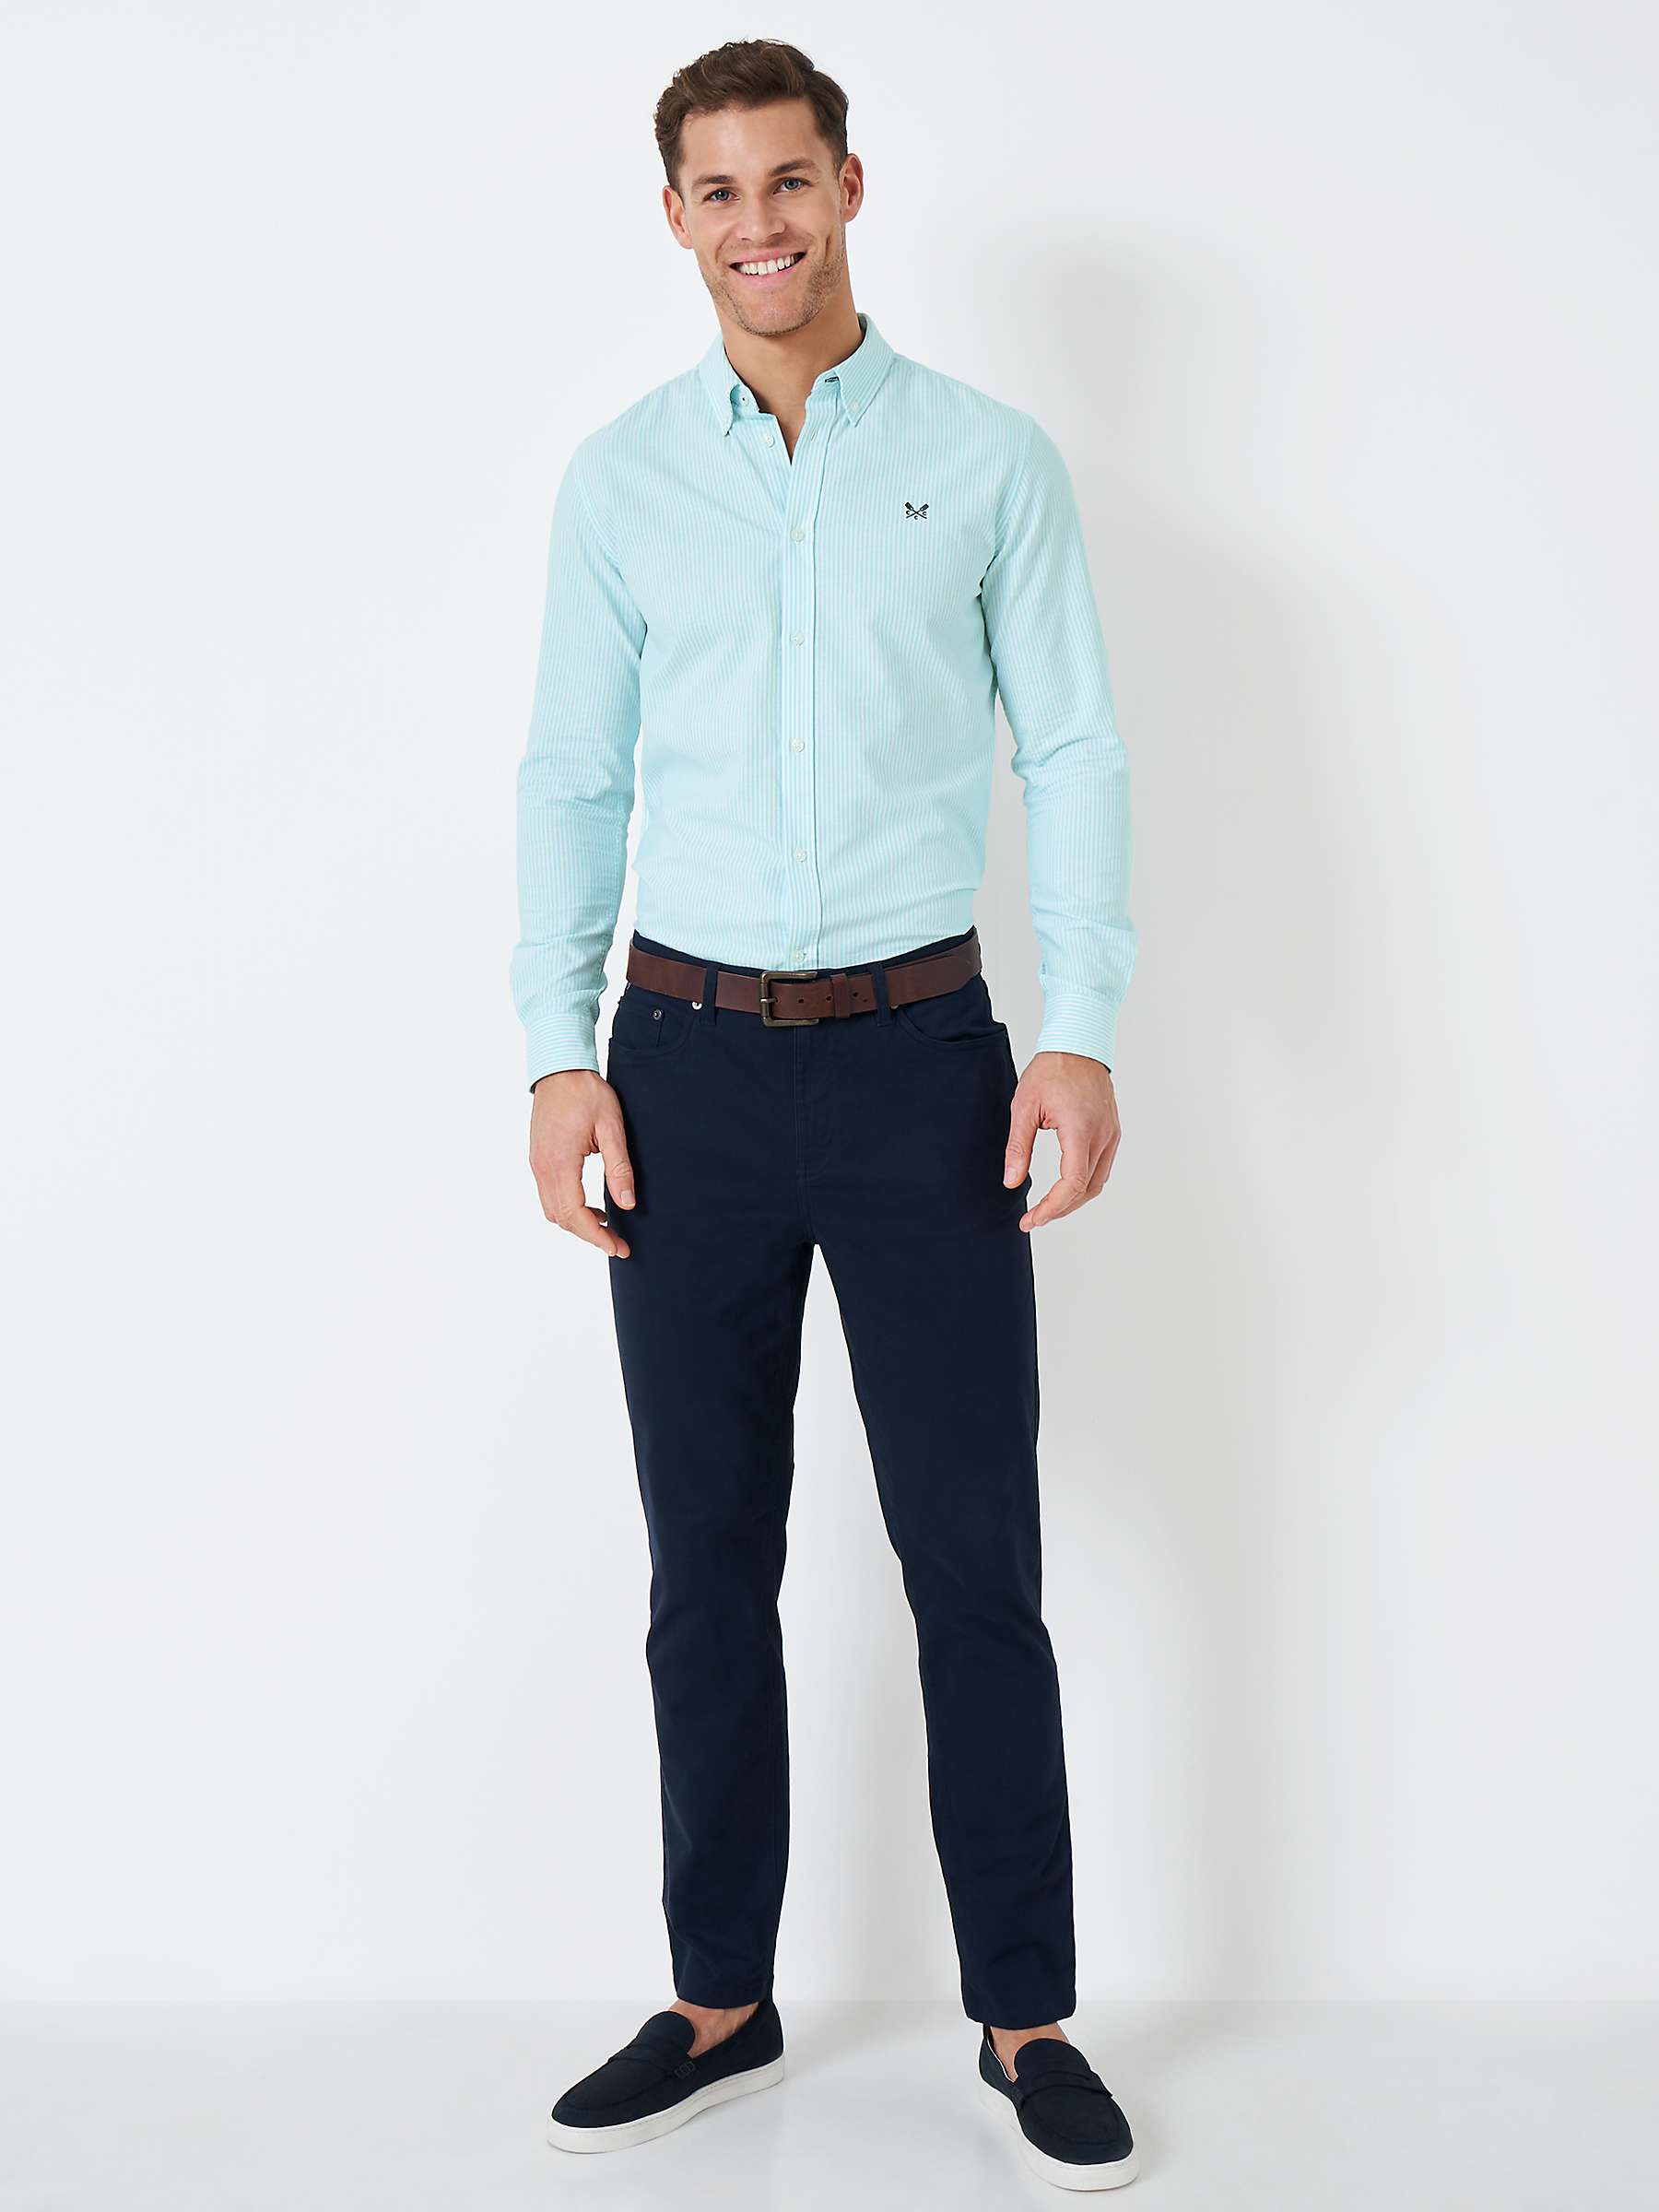 Buy Crew Clothing Slim Fit Long Sleeve Oxford Shirt, Mint Green Online at johnlewis.com